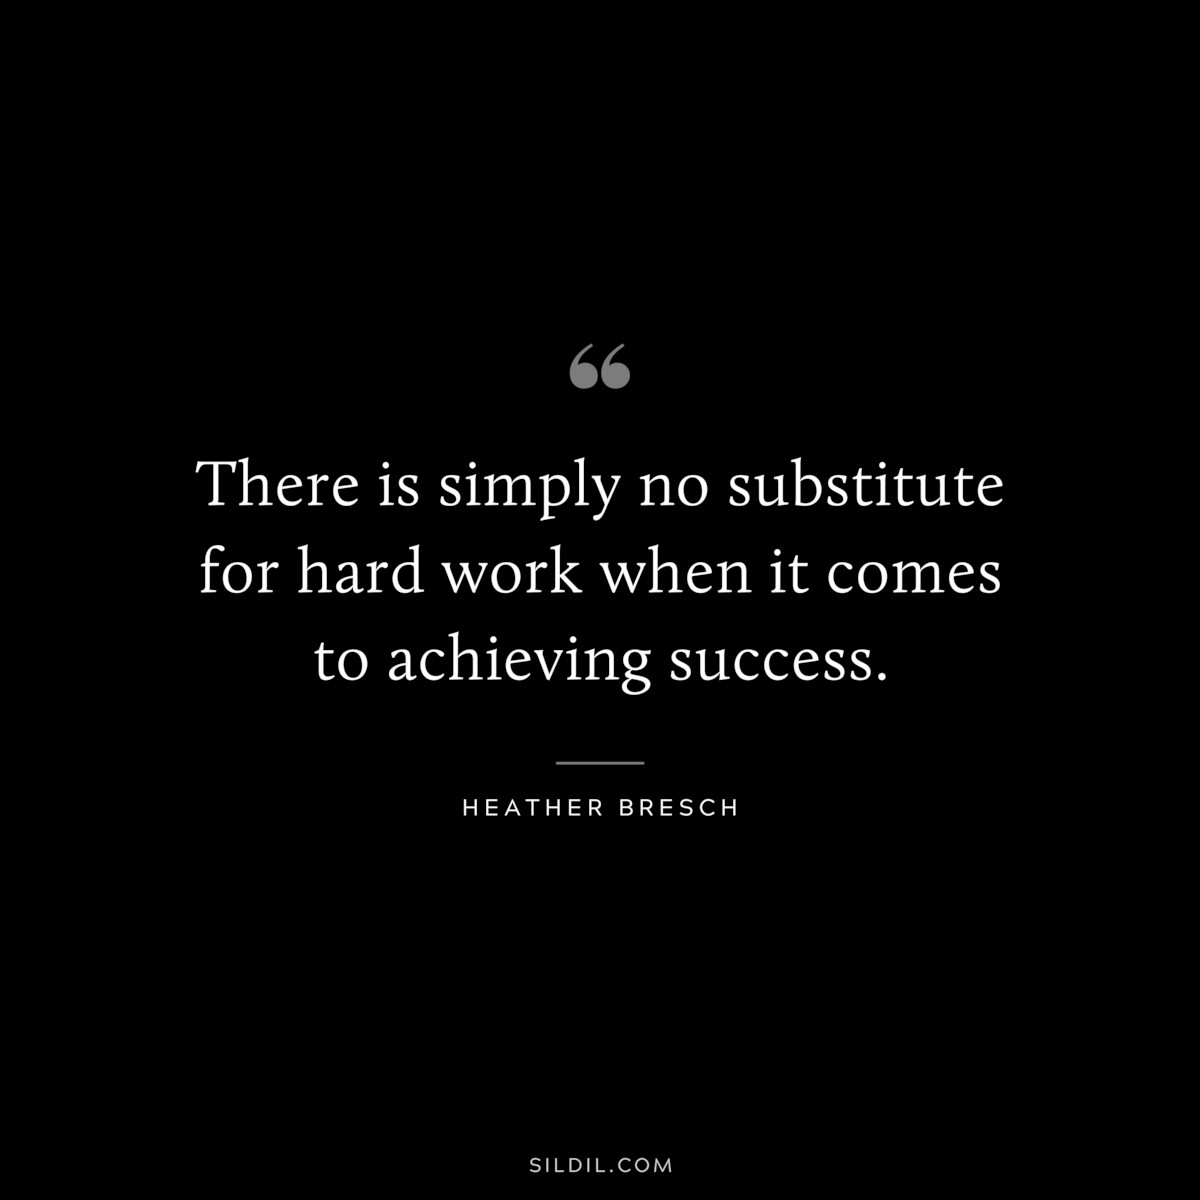 There is simply no substitute for hard work when it comes to achieving success. ― Heather Bresch